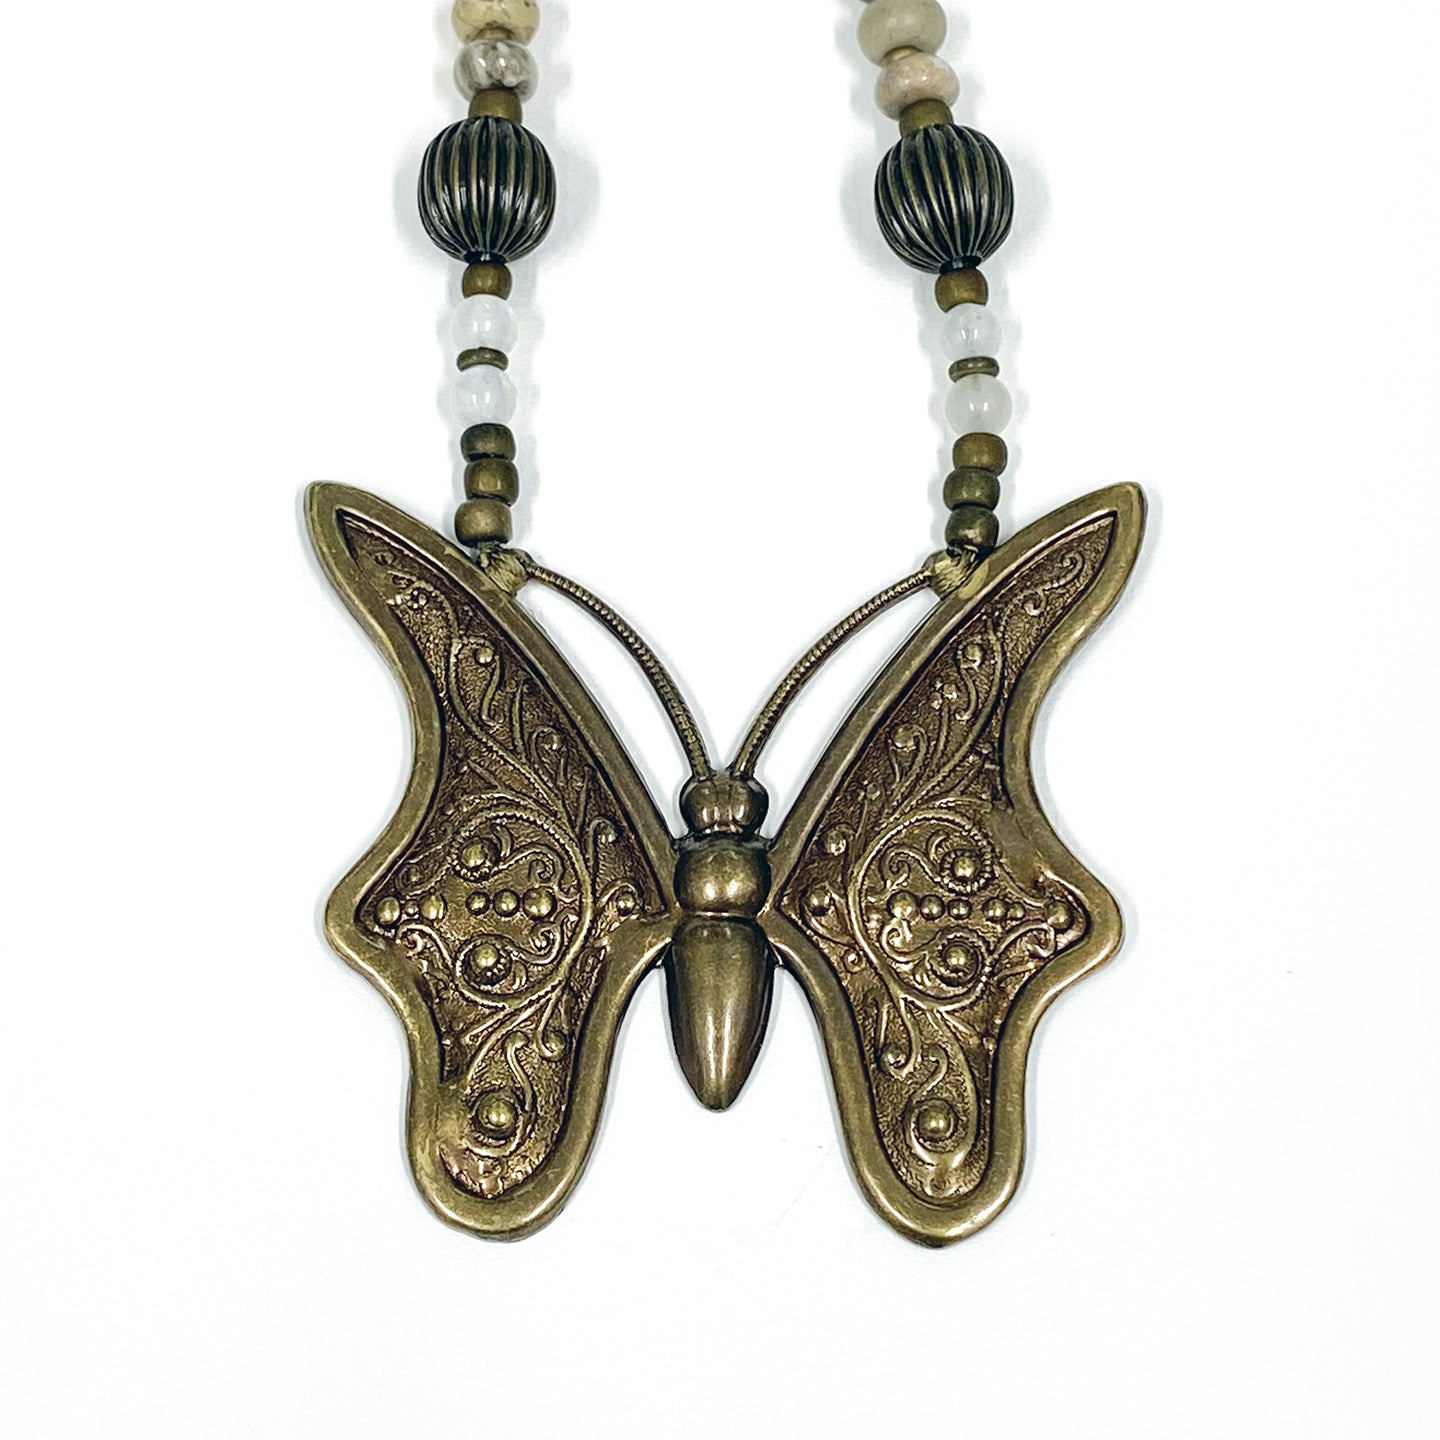 Petoskey Stone Necklace with a butterfly pendant by Michigan artist Janice Copperstone.